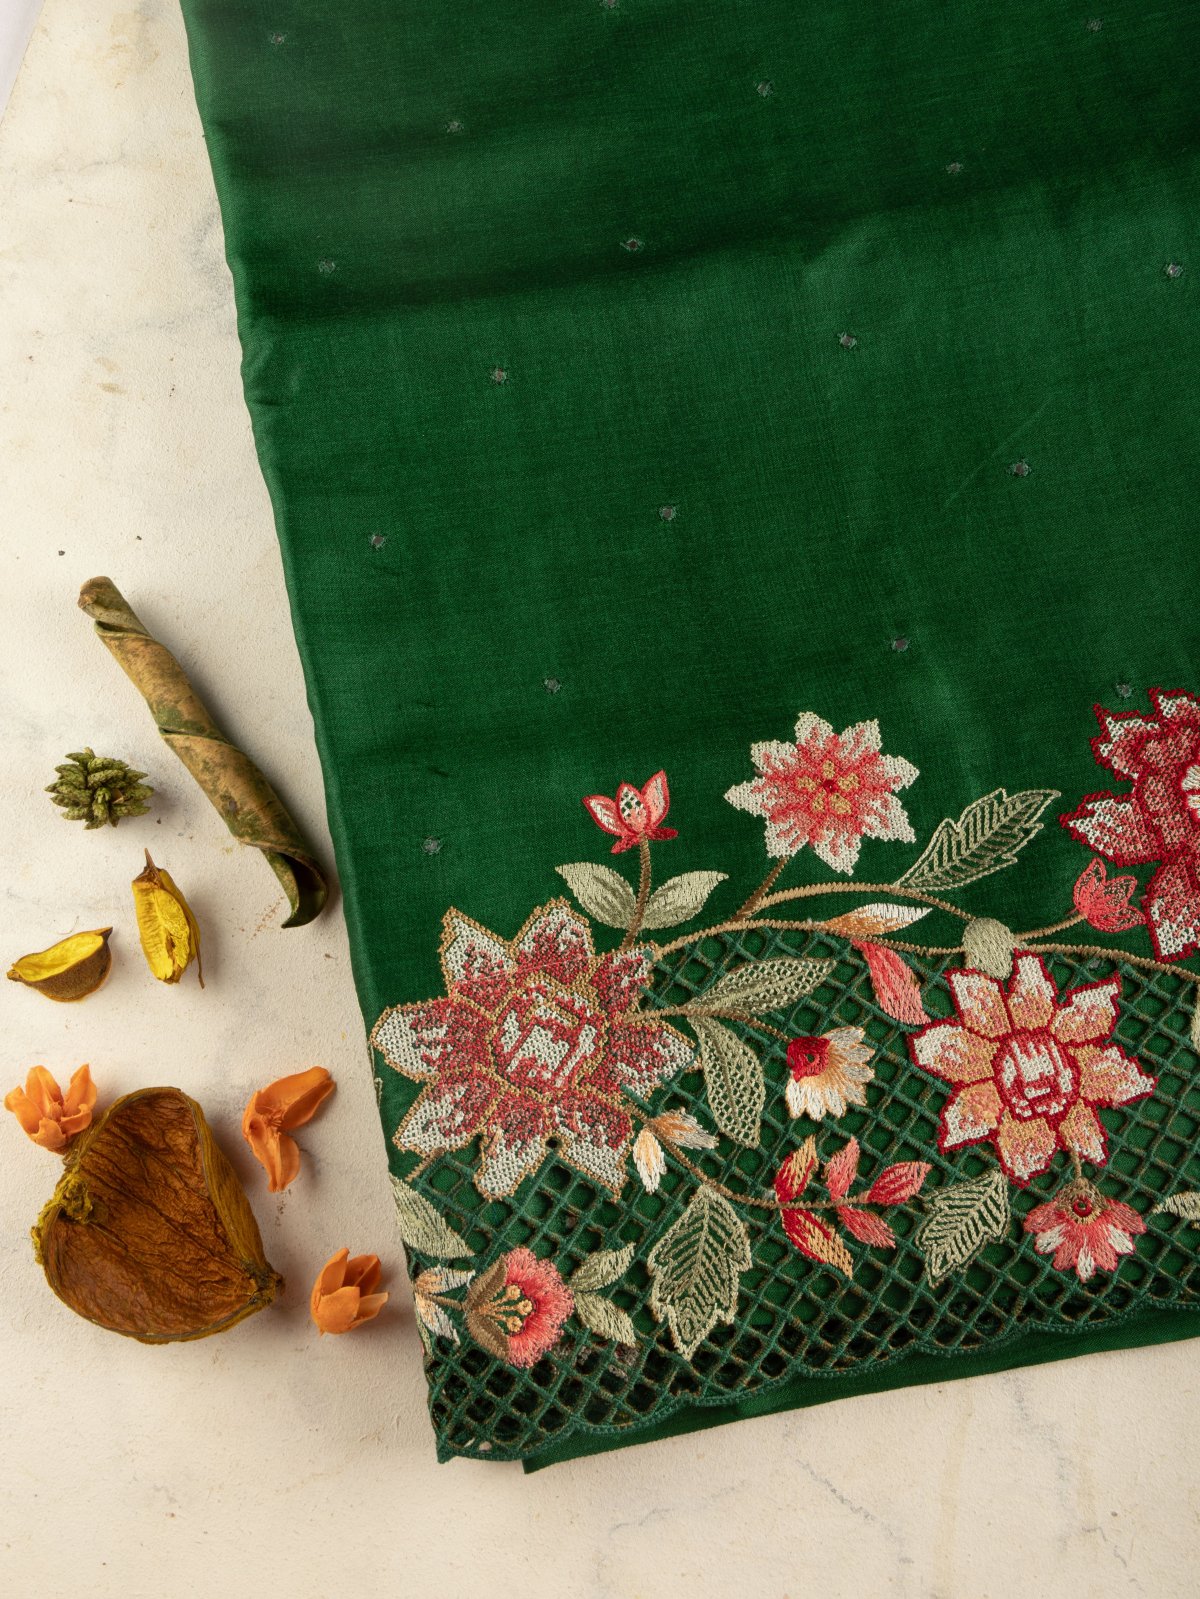 Green Tussar Silk Saree with Floral Embroidery Border